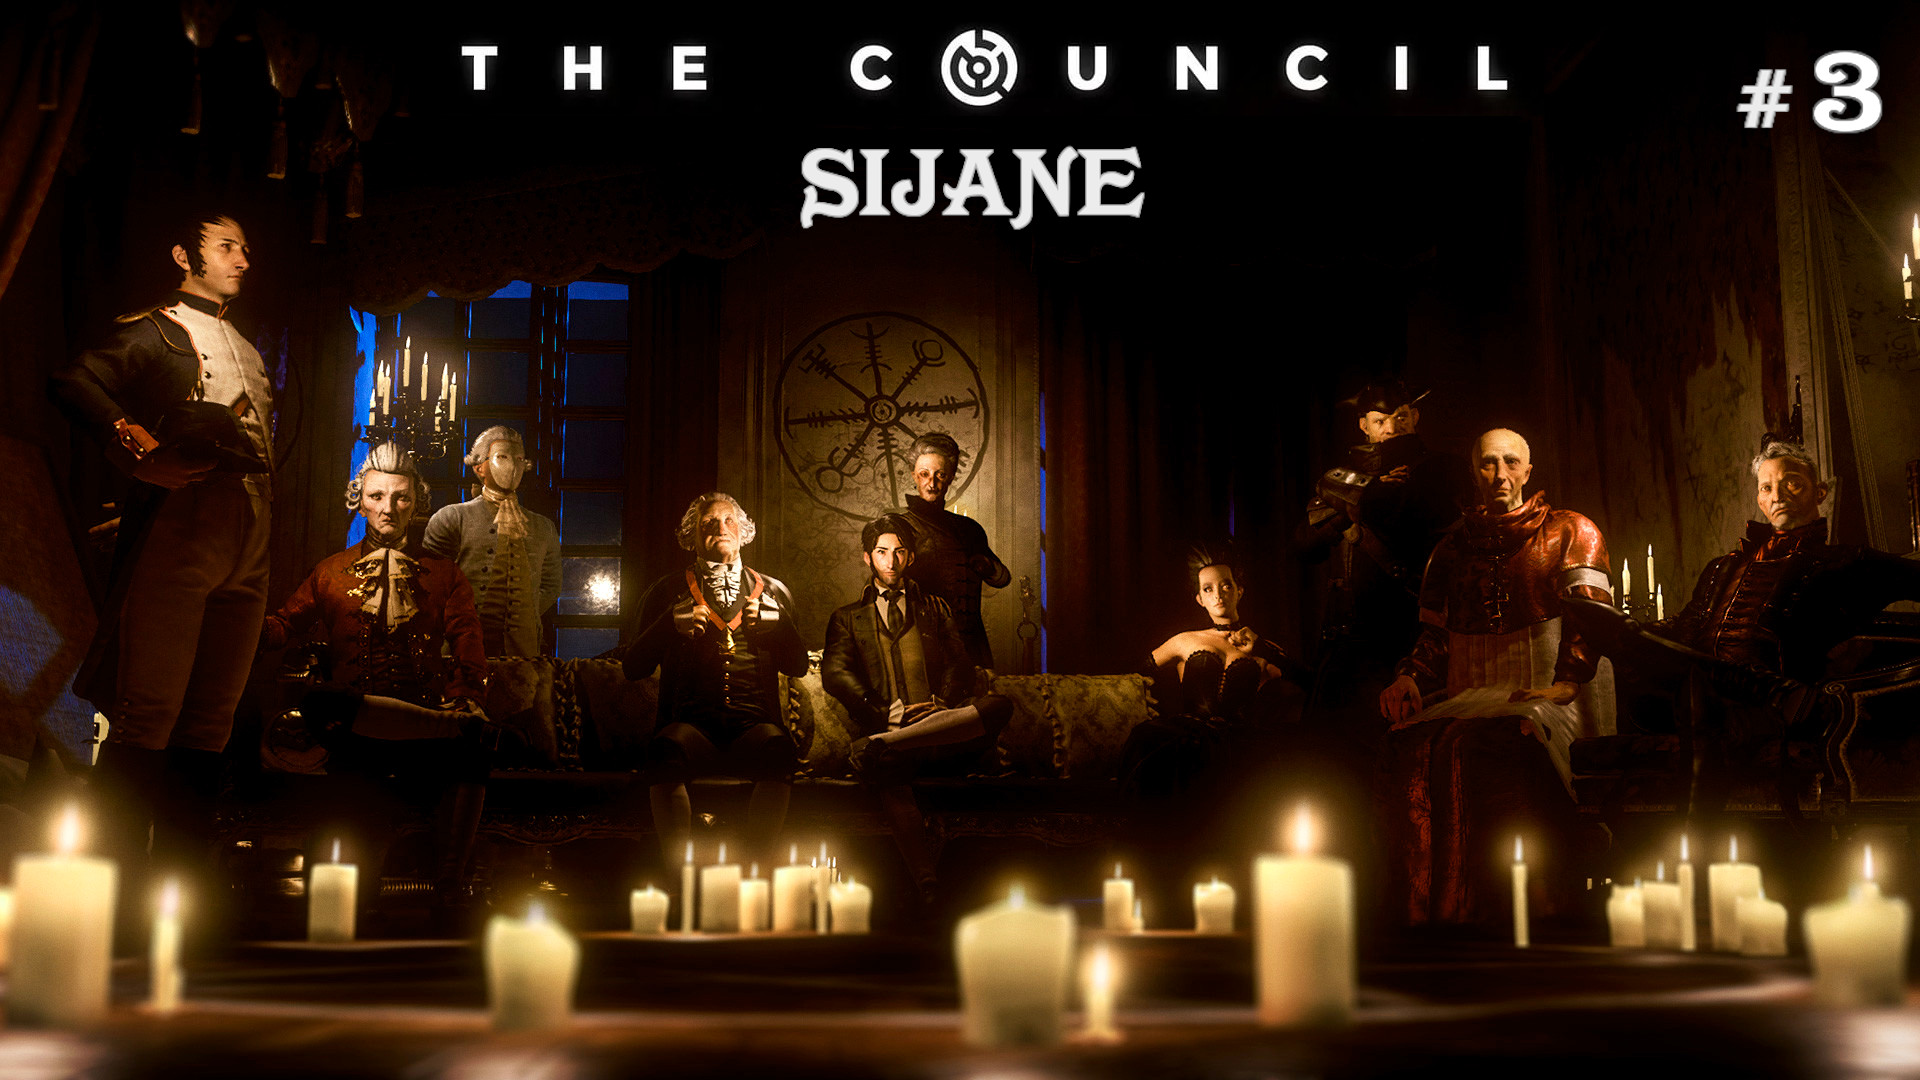 The Council Episode 2 - Hide and Seek #3